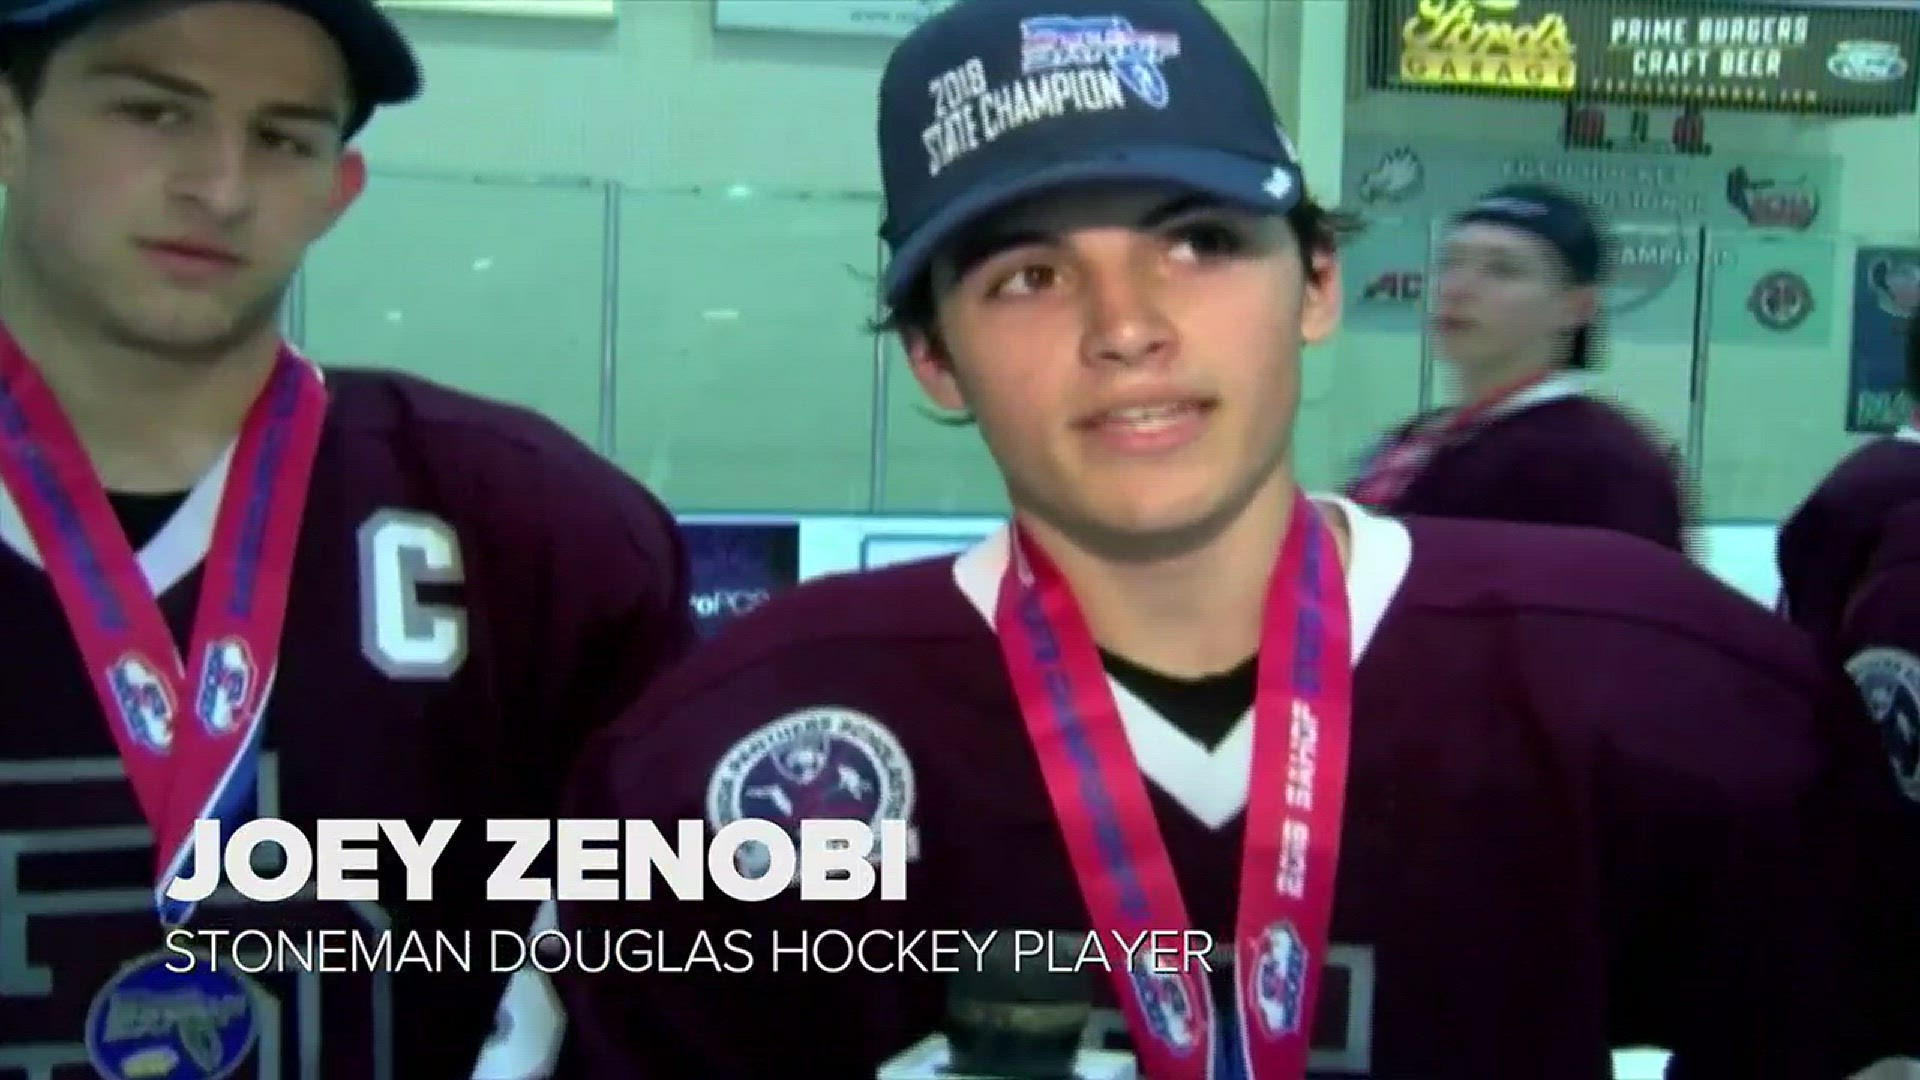 Players on the Stoneman Douglas High School hockey team react to winning a state championship less than two weeks after a mass shooting killed 17 people at their school. Video: ABC